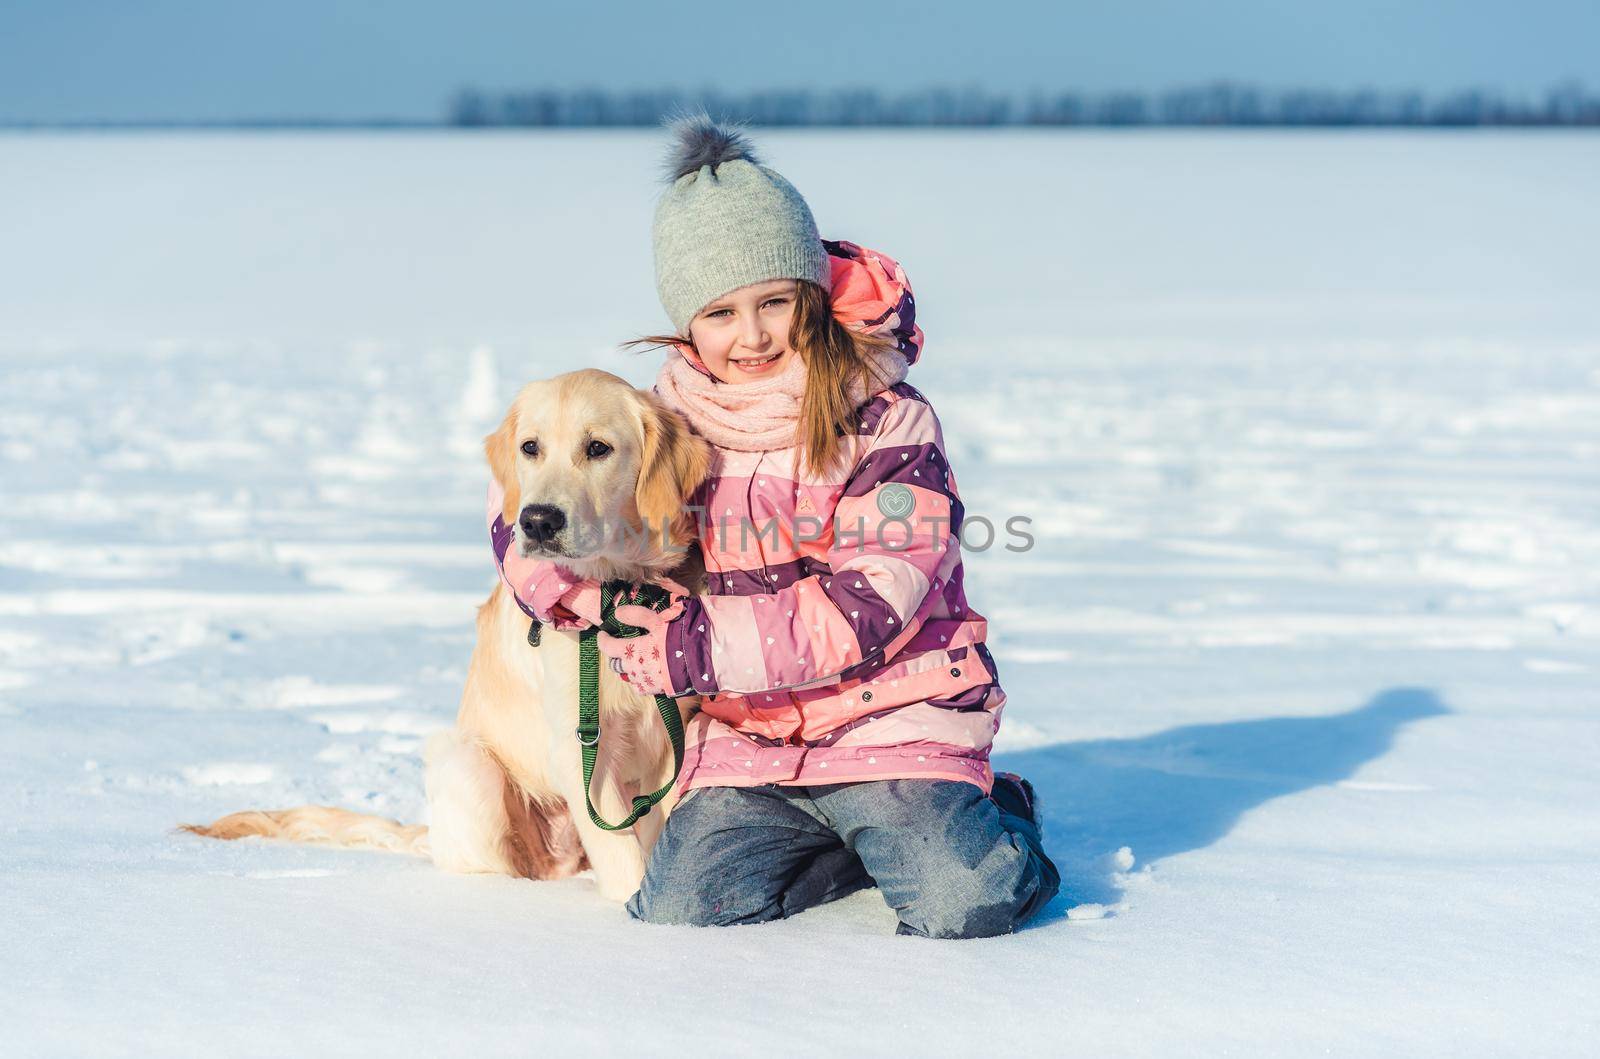 Charming little girl sitting on snow next to loyal dog